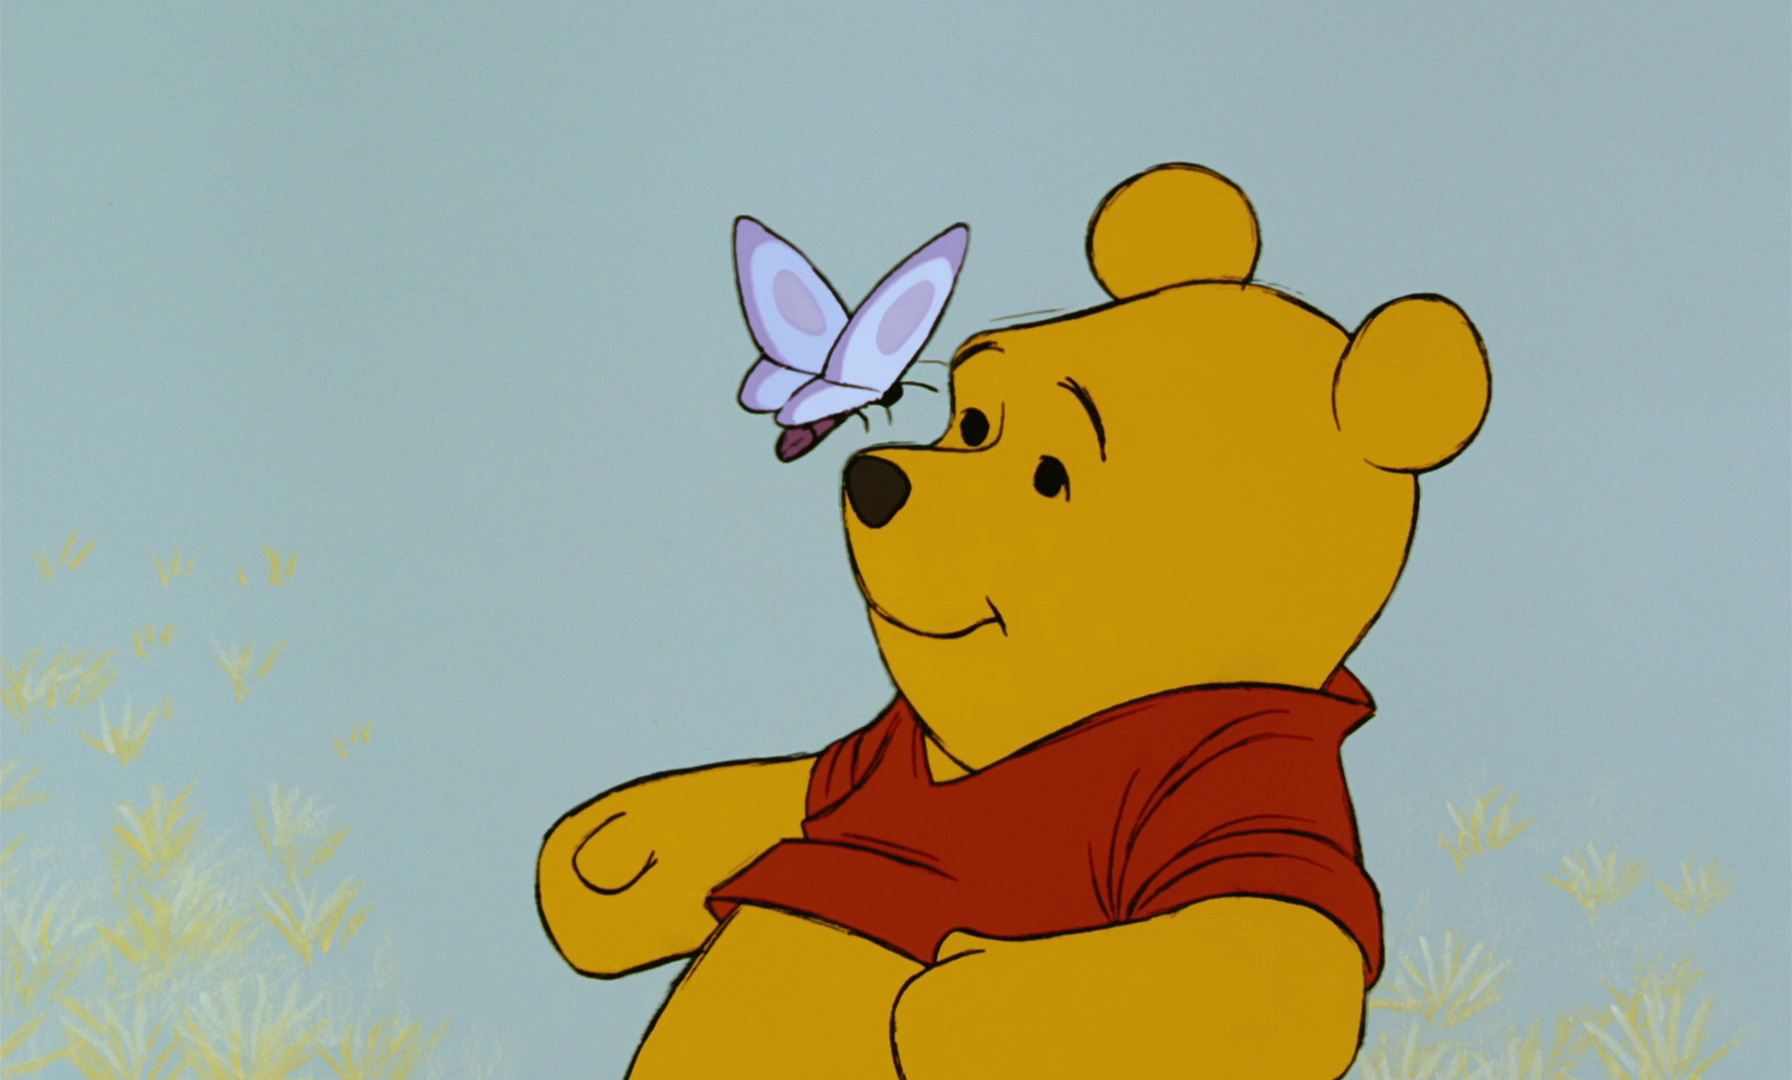 winnie the pooh sketch butterfly